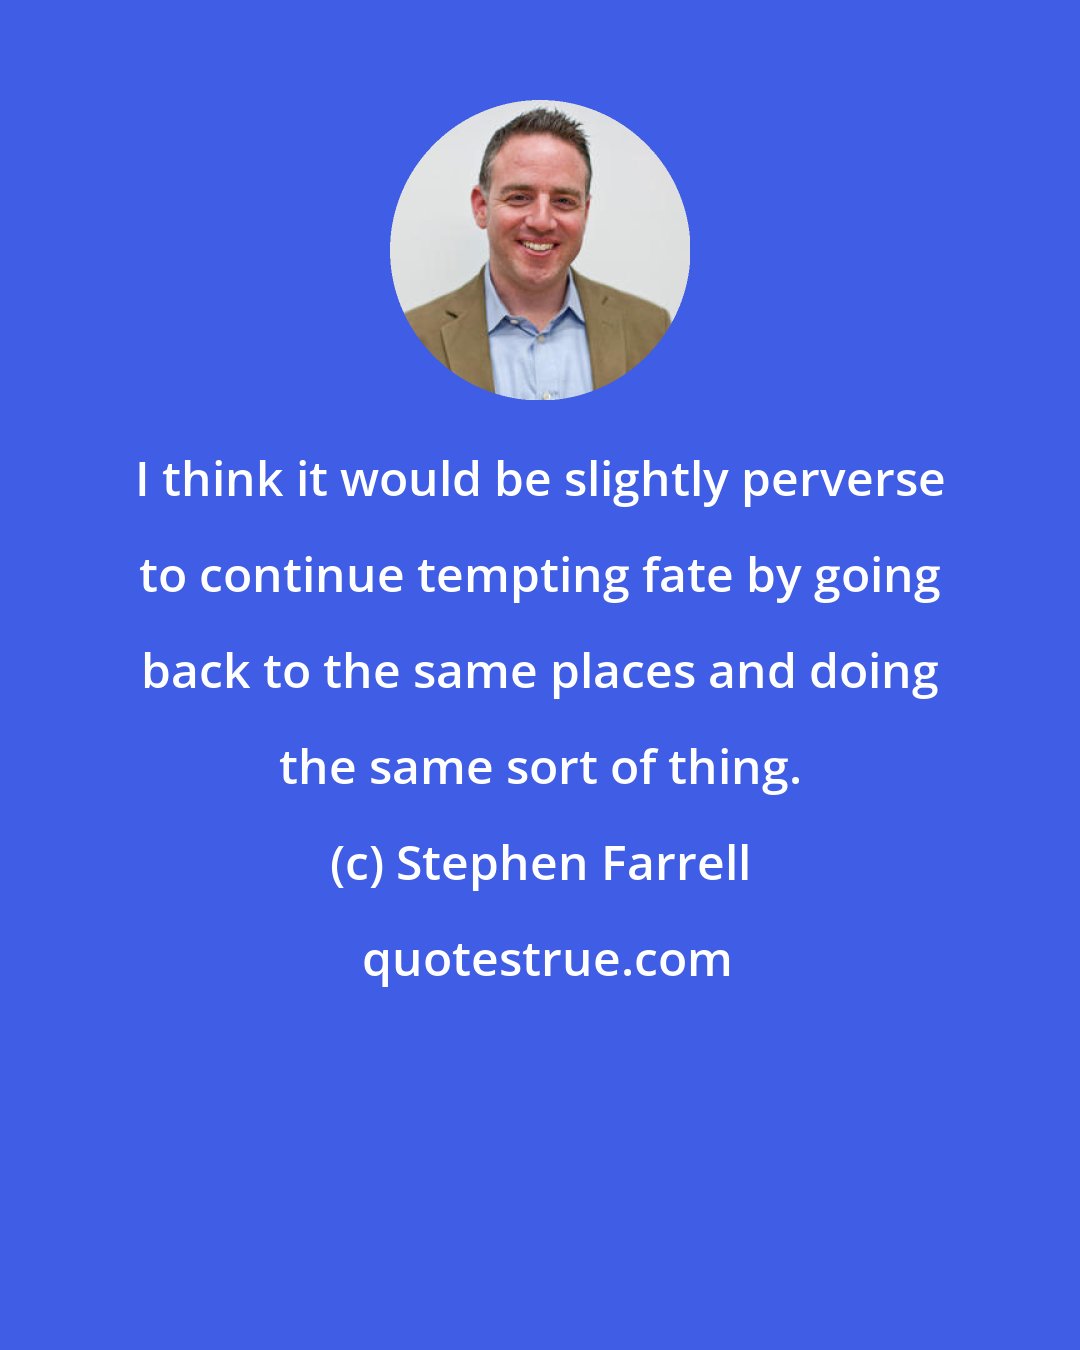 Stephen Farrell: I think it would be slightly perverse to continue tempting fate by going back to the same places and doing the same sort of thing.